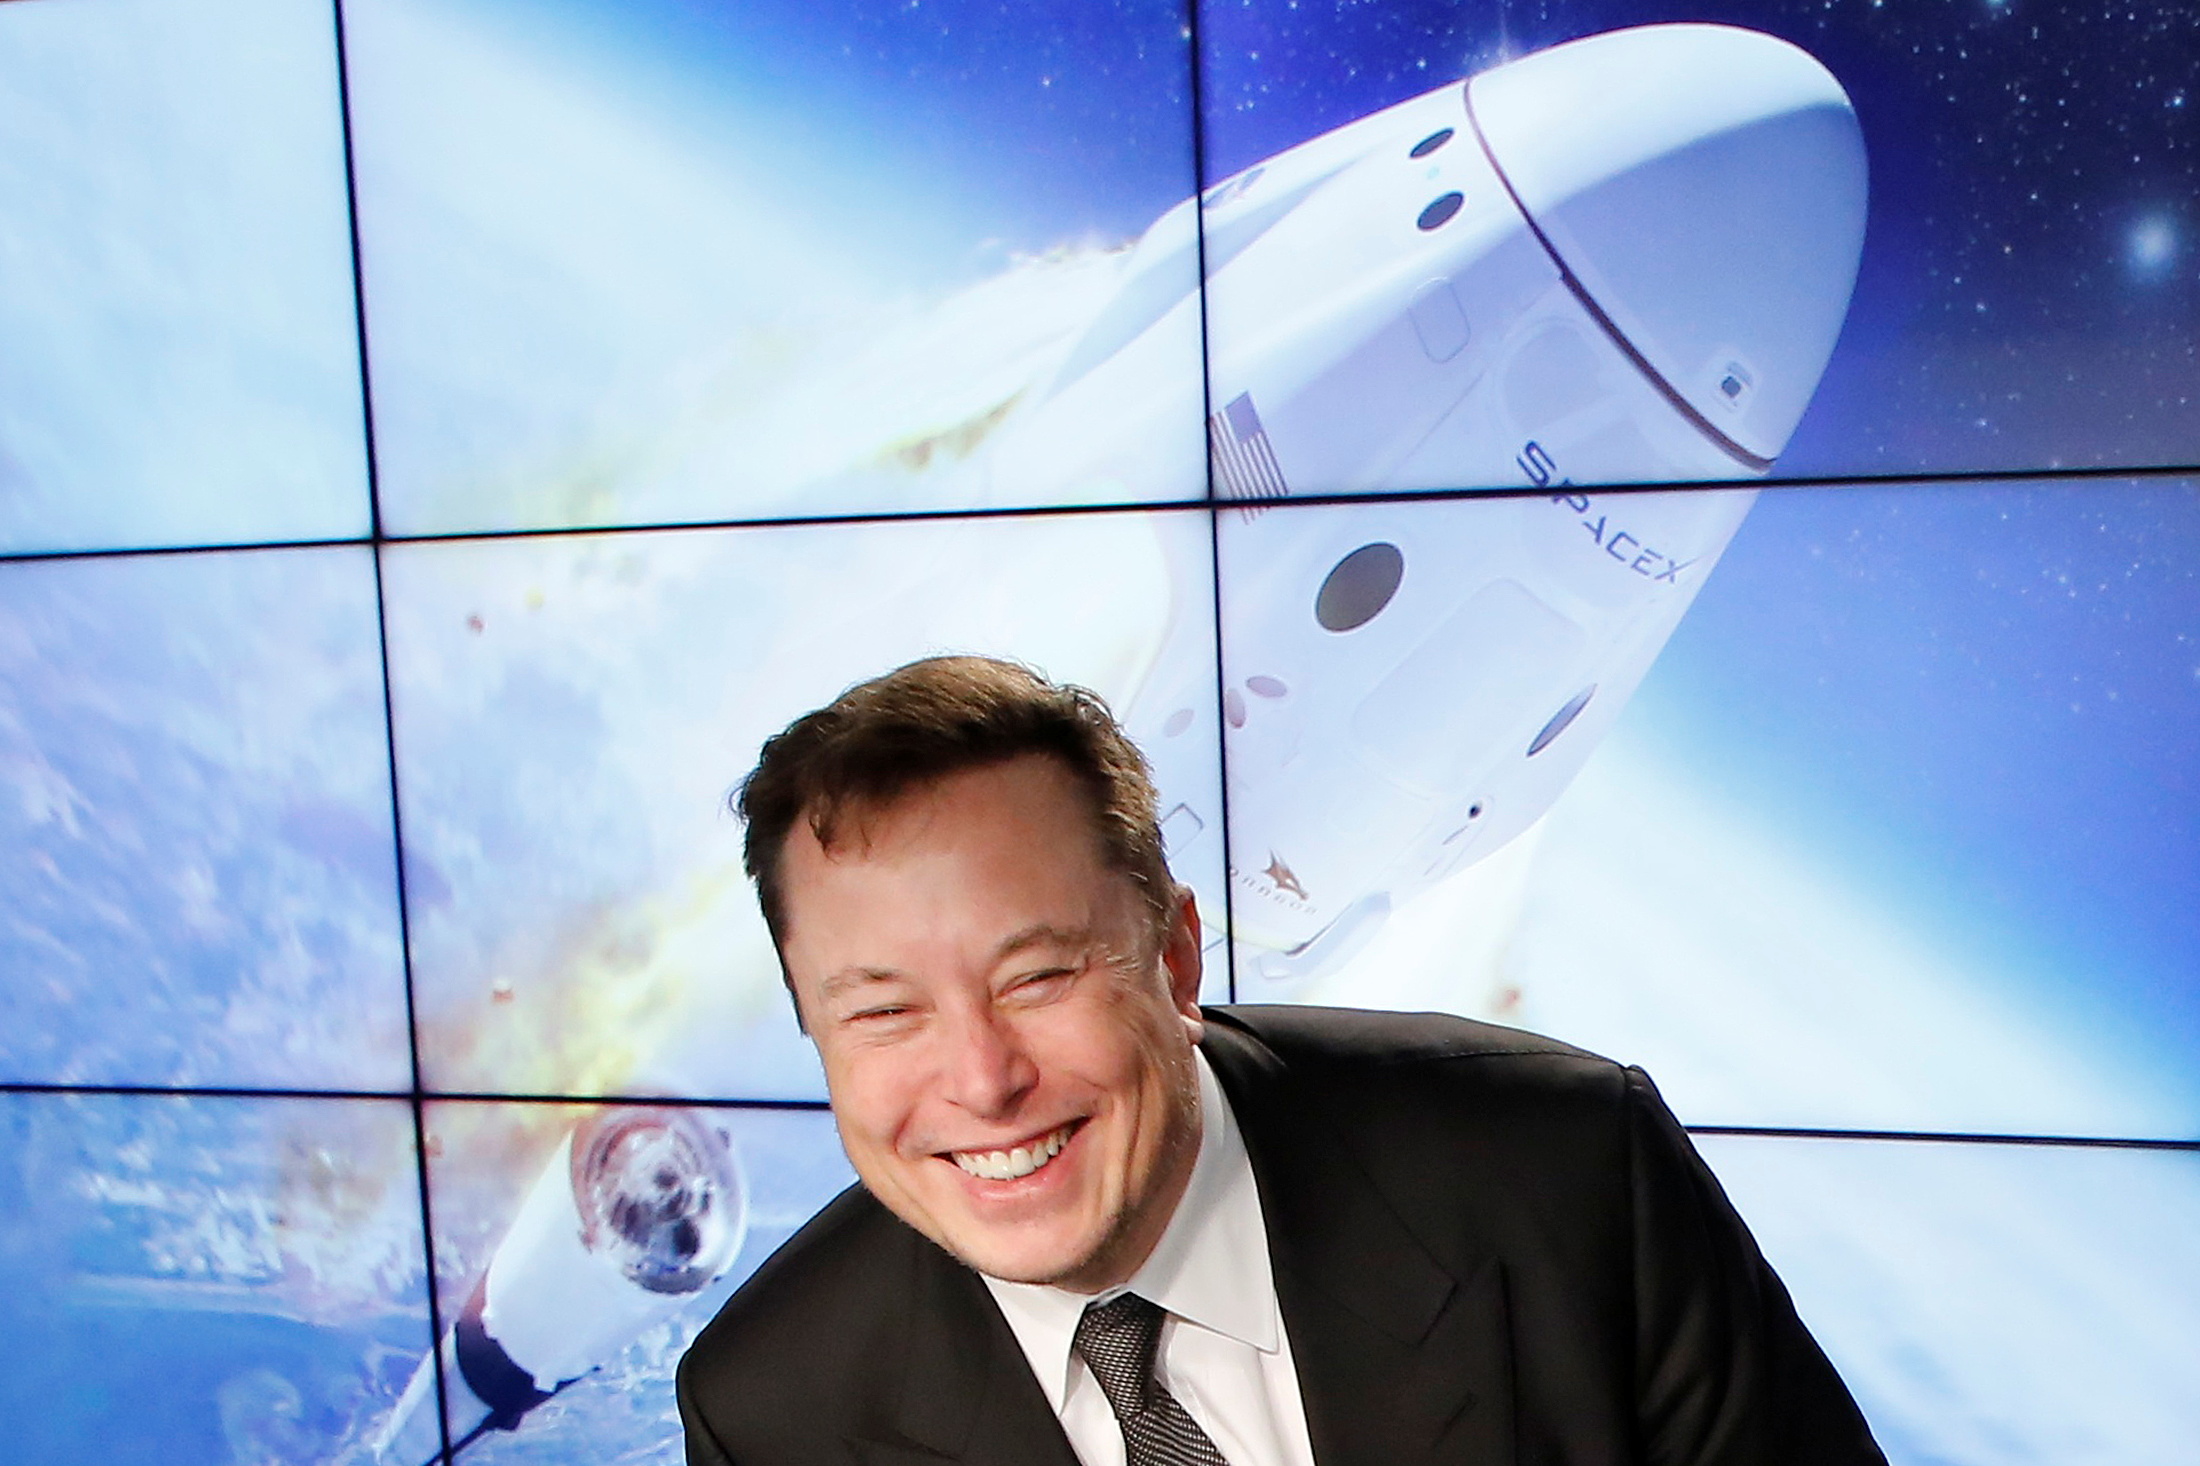 PHOTO: SpaceX founder and chief engineer Elon Musk reacts at a post-launch news conference to discuss the  SpaceX Crew Dragon astronaut capsule in-flight abort test at the Kennedy Space Center in Cape Canaveral, Fla., Jan. 19, 2020.